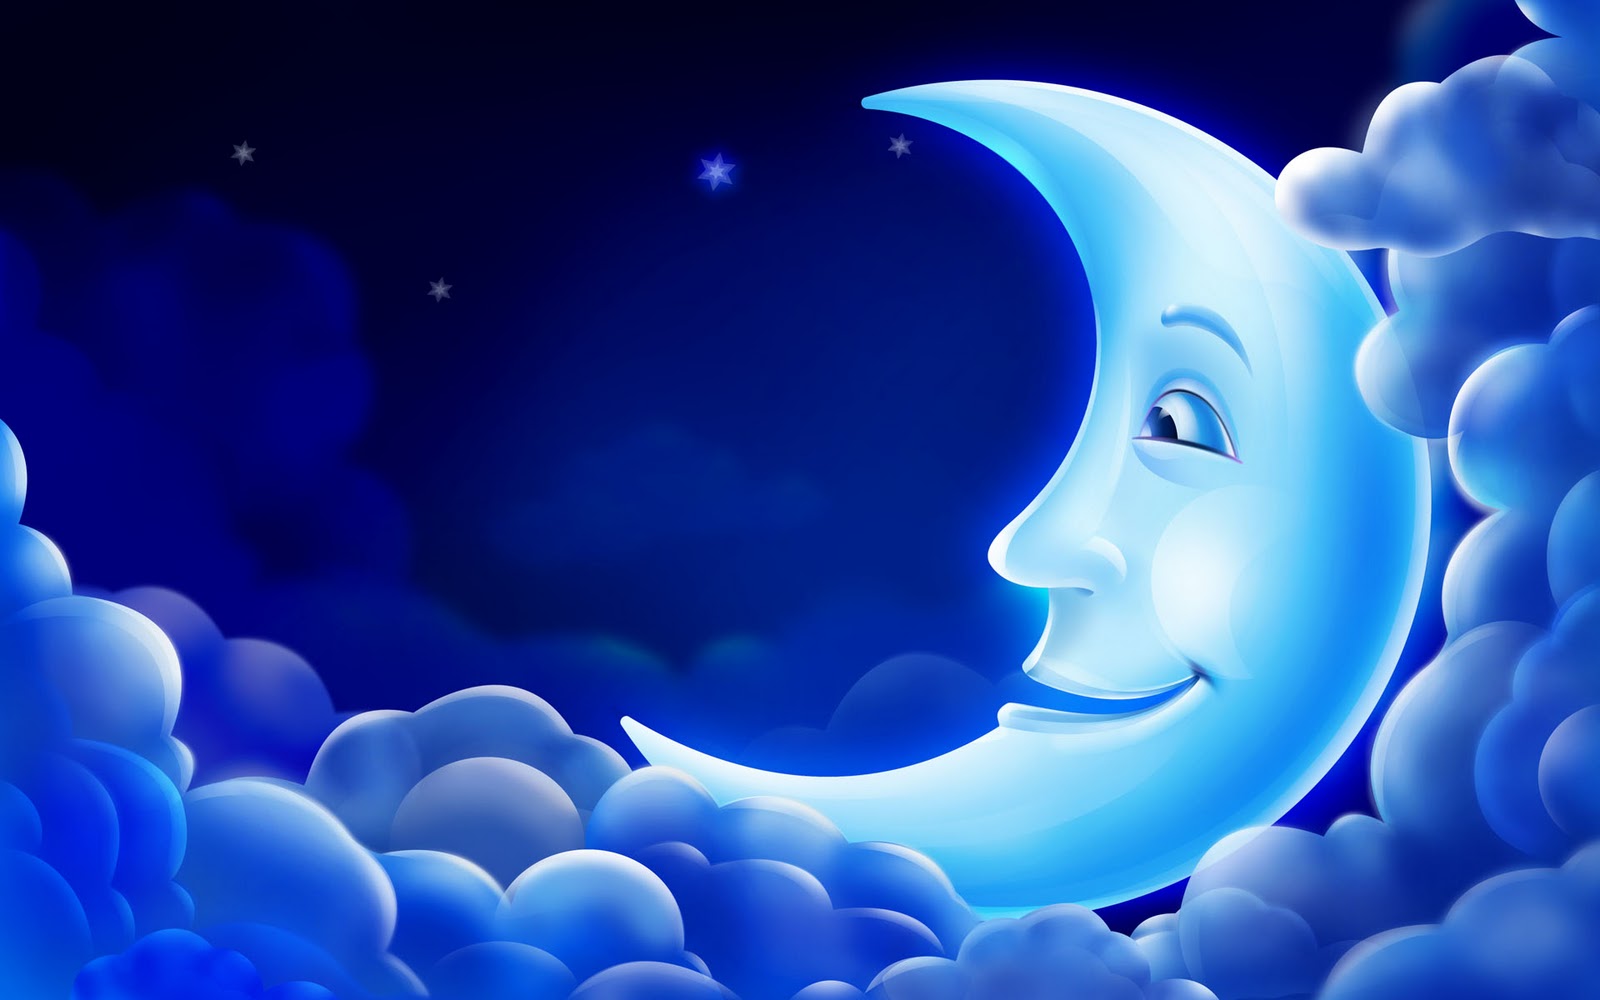 3D Blue Animated Moon backgrounds